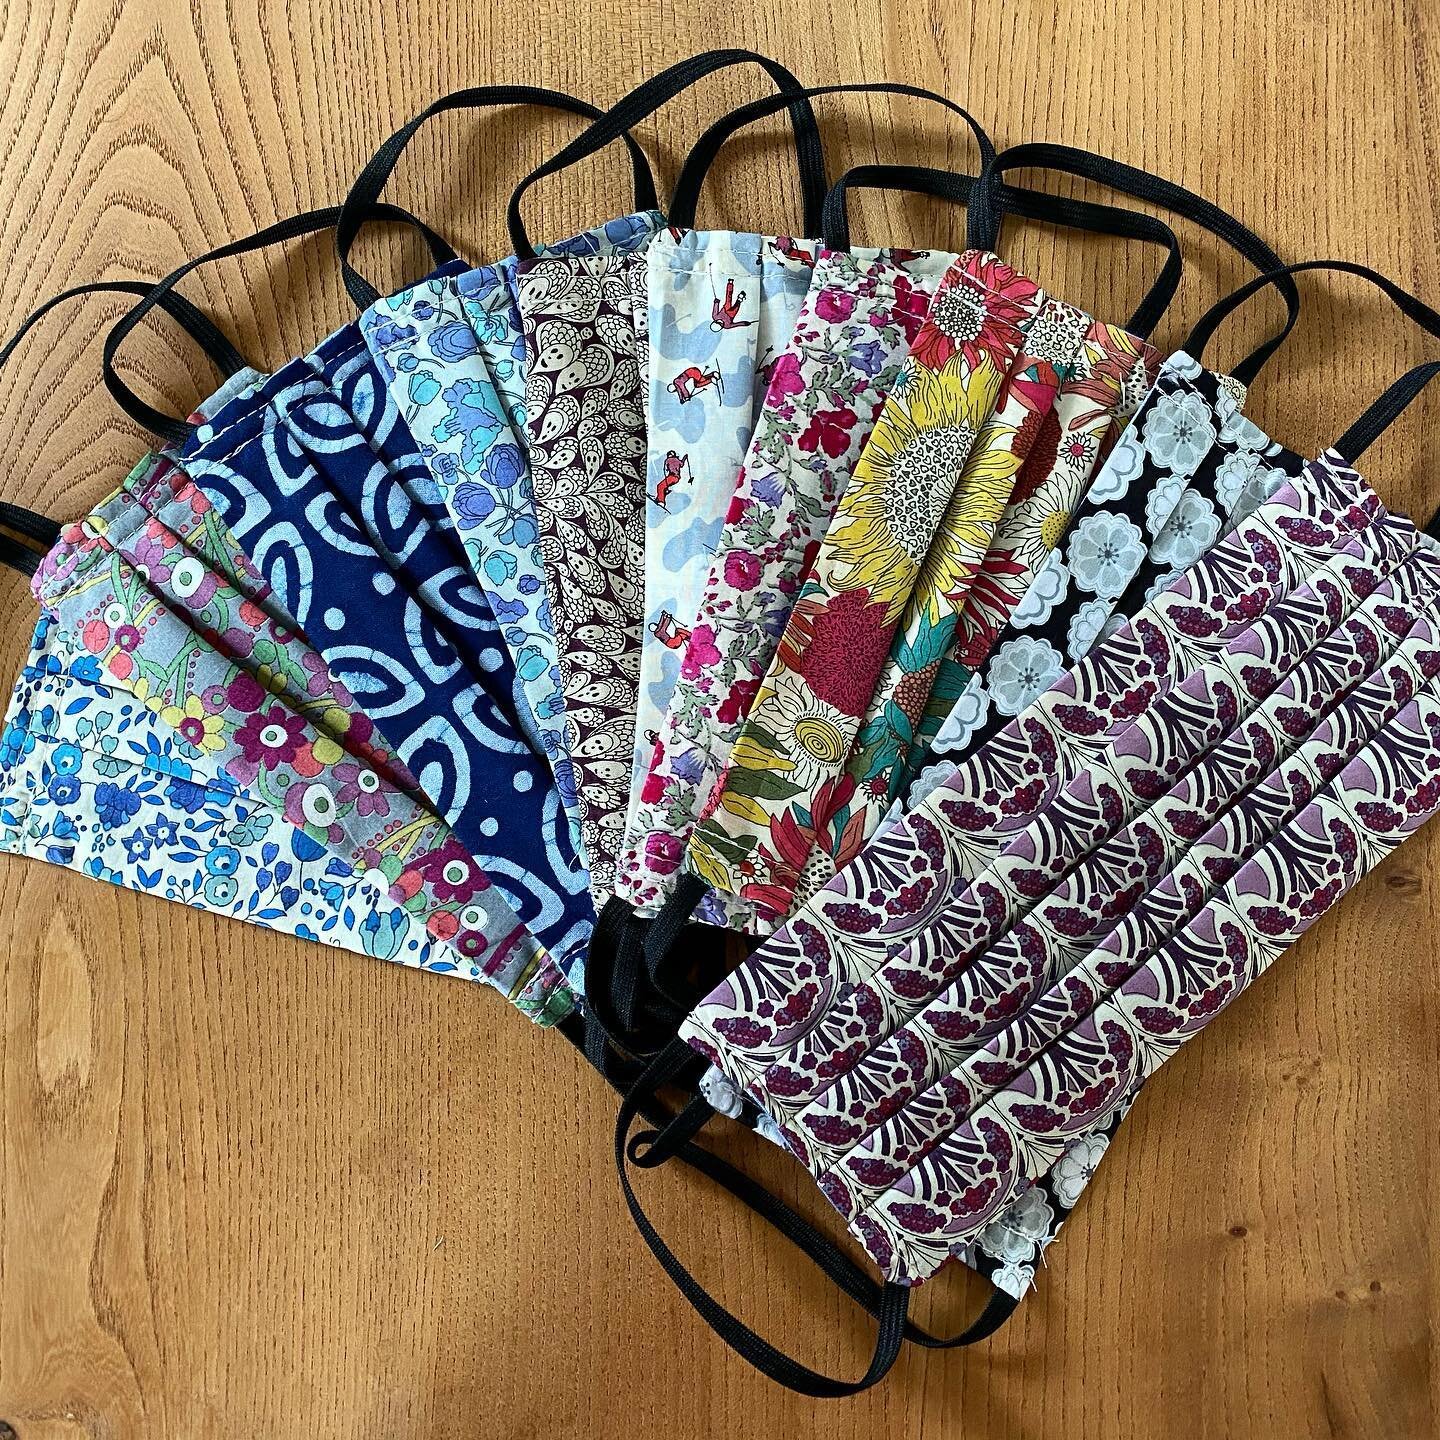 A few of the masks made today. Made from liberty lawn and cotton. They are not only light but also have a slot for a filter. Order from us &pound;10 each or 2 for &pound;18.  #liberty #libertymask #libertyfacemask #libertyopencall #facemask #coronavi